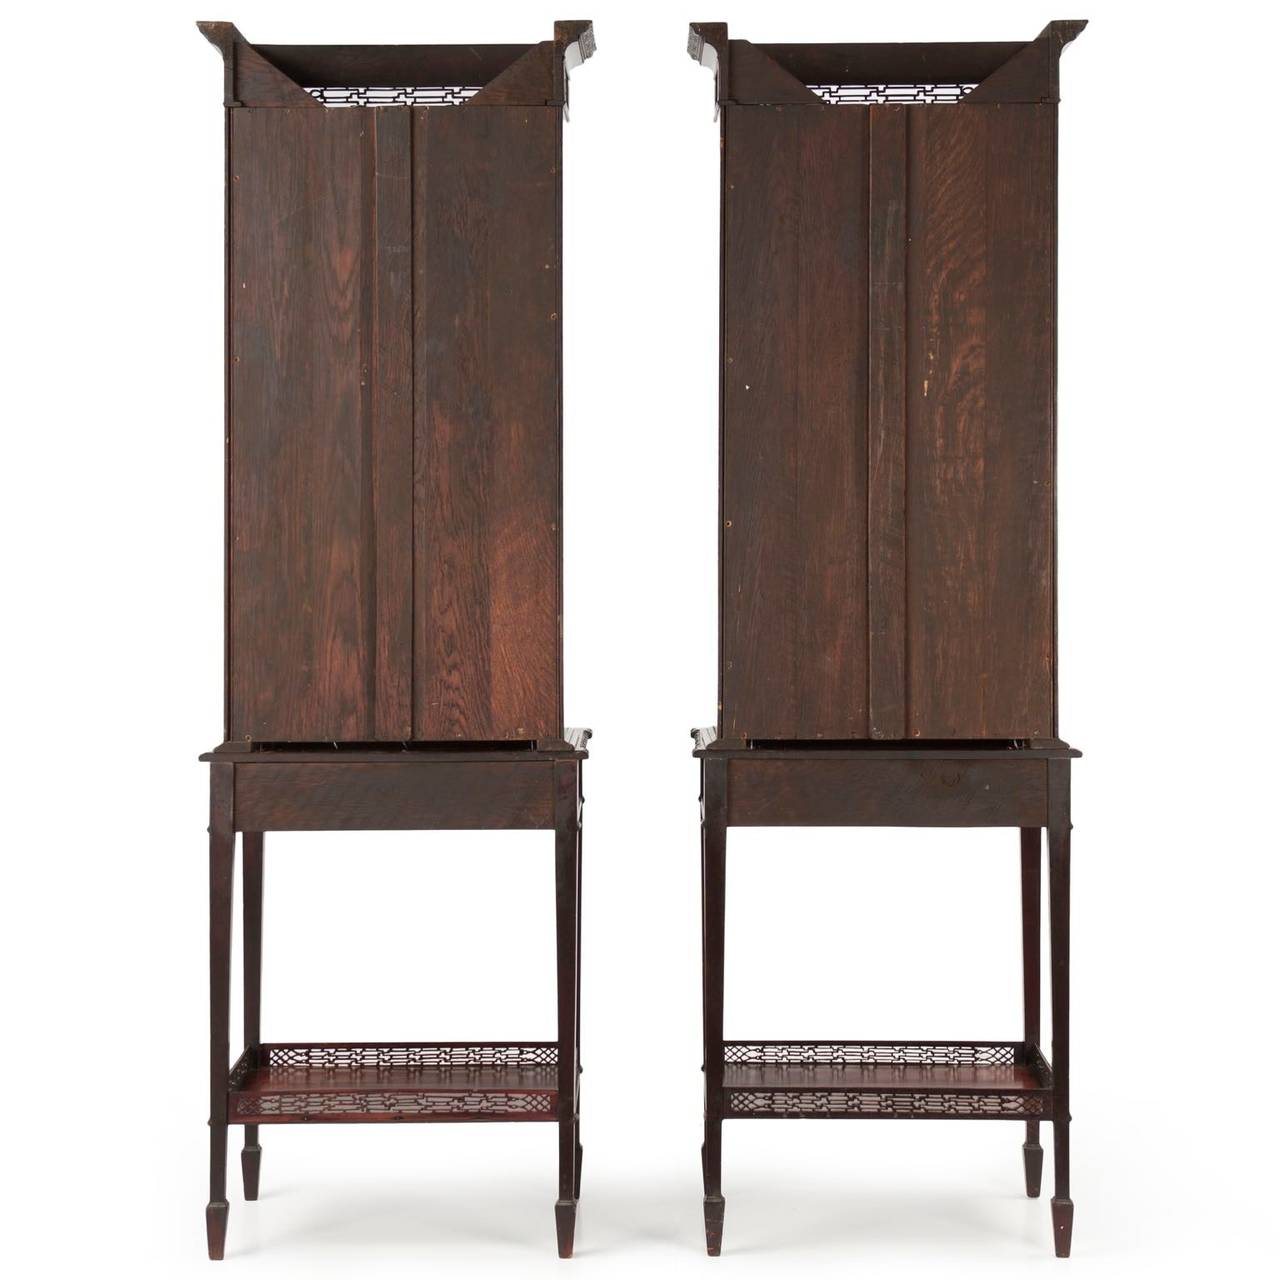 British Rare Pair of Chinese Chippendale Style Curio Cabinets or Bookshelves, circa 1880